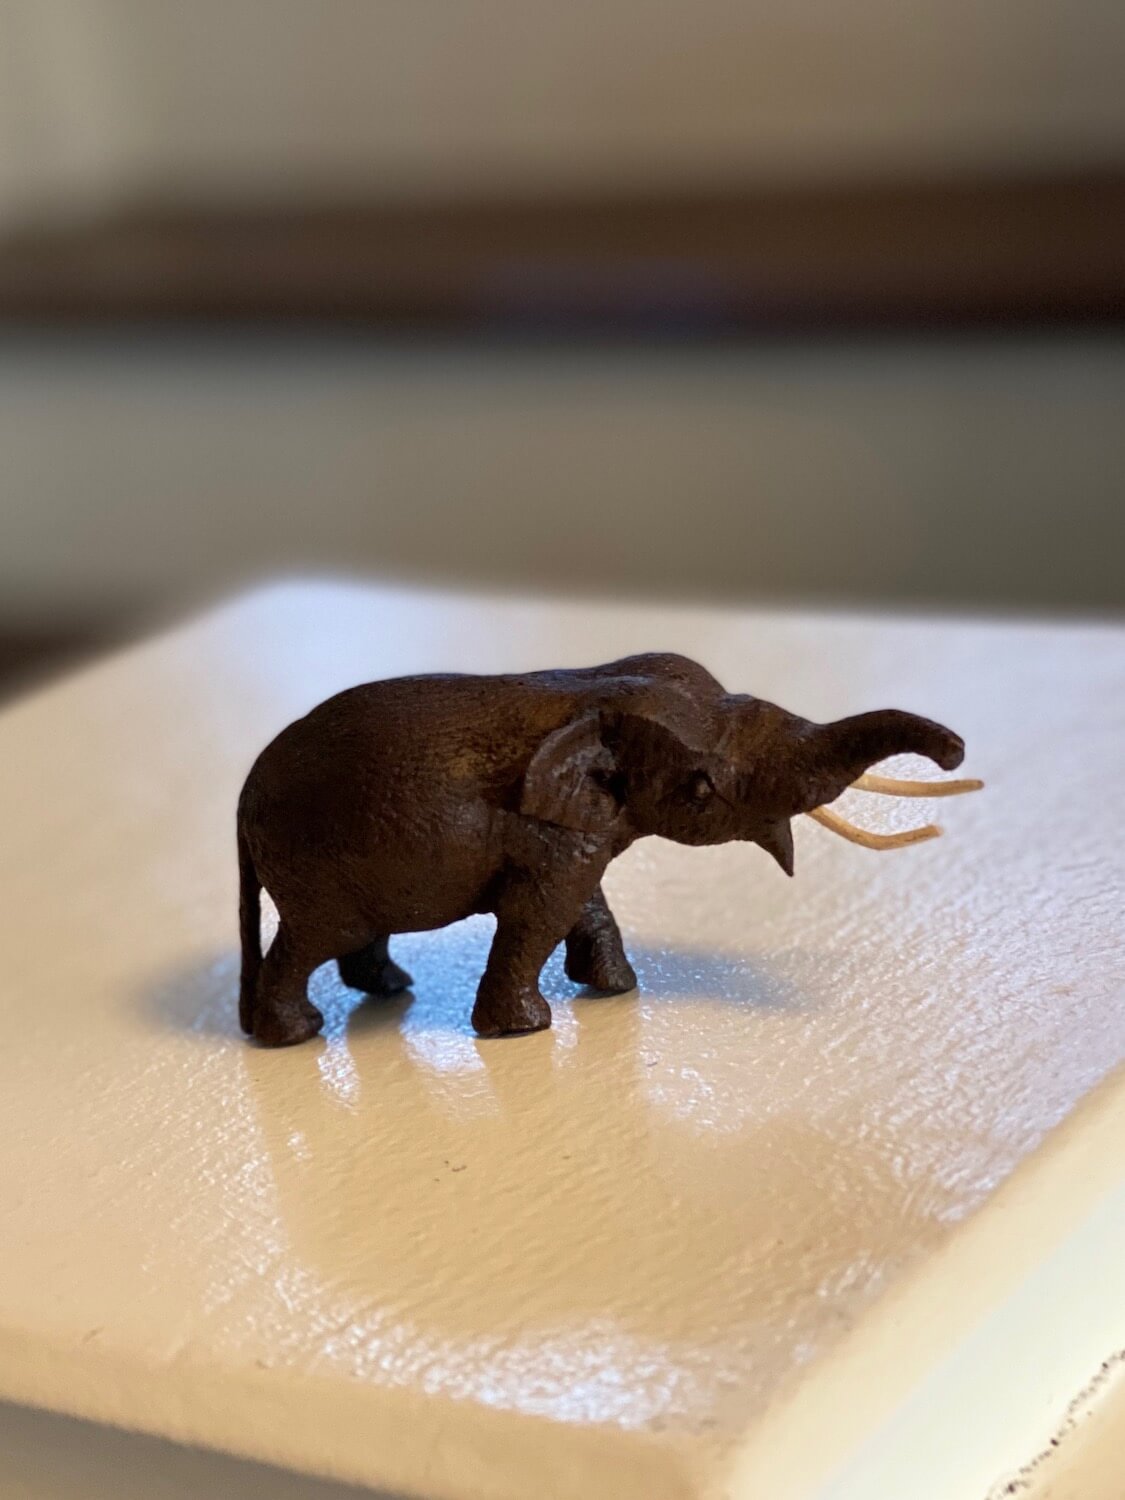 A miniature carved elephant made from dark brown mahogany. The elephant has two white tusks and is in a position as if calling out, with trunk protruding horizontally outward. This was purchased in the shop adjacent to the renown restaurant Bo.Lan in Bangkok Thailand